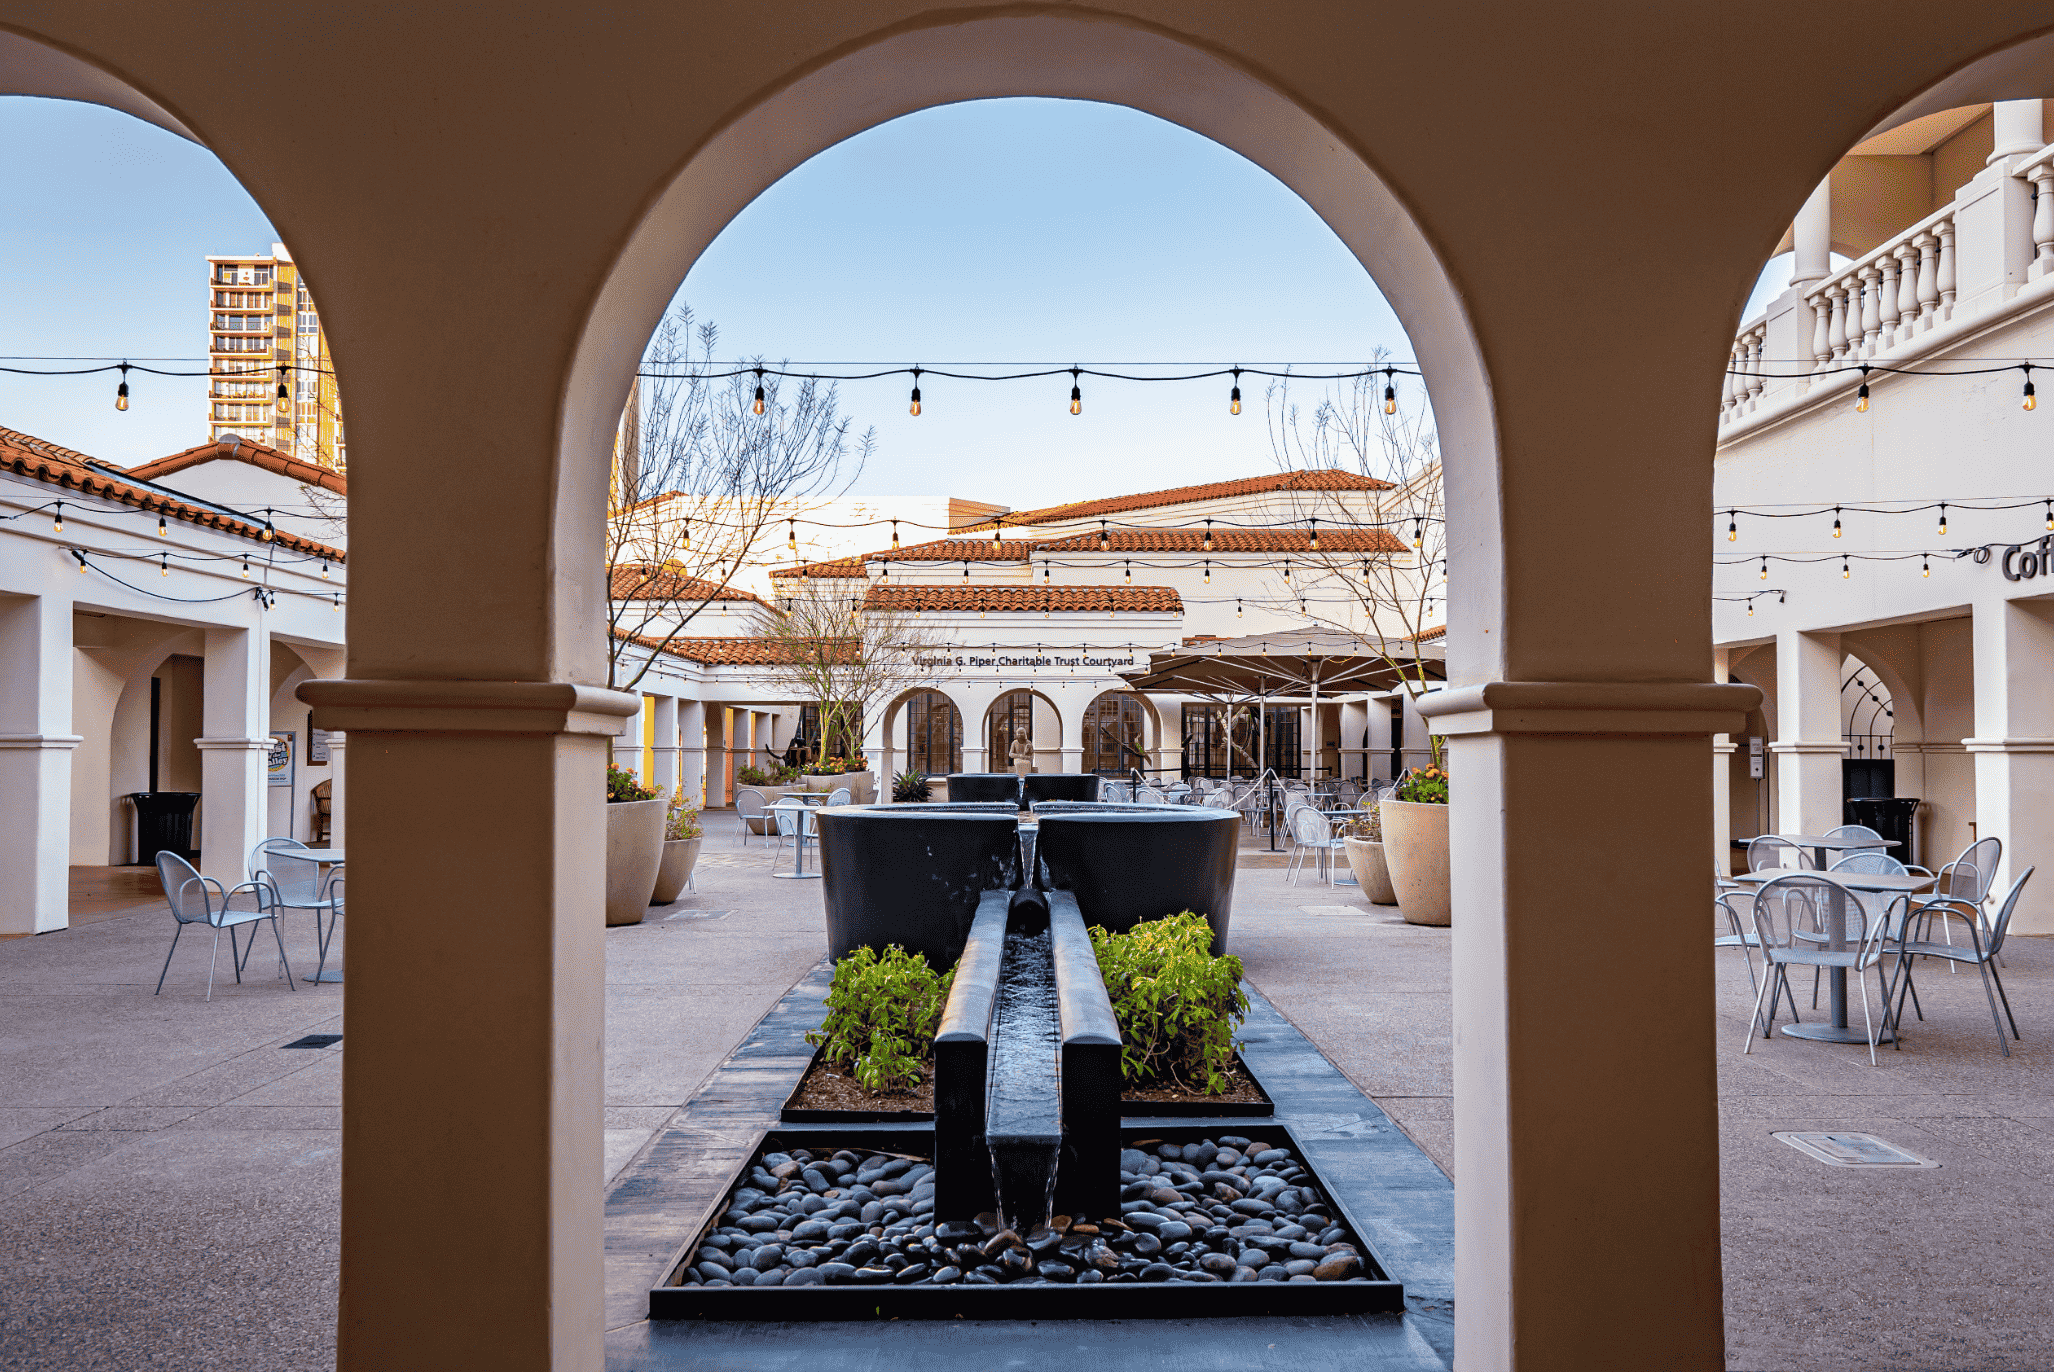 A courtyard with a fountain in the middle of it.